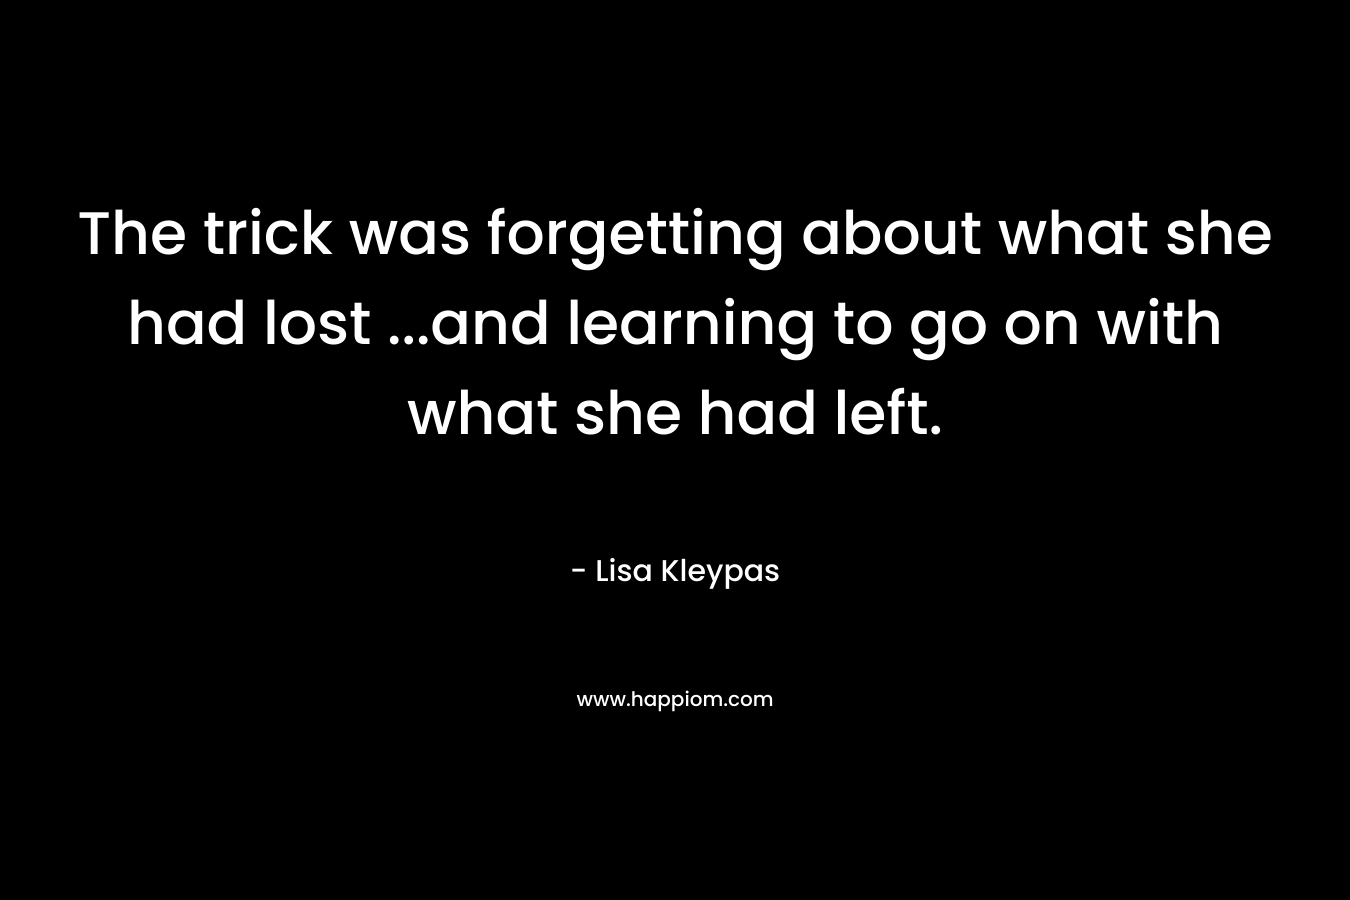 The trick was forgetting about what she had lost ...and learning to go on with what she had left.